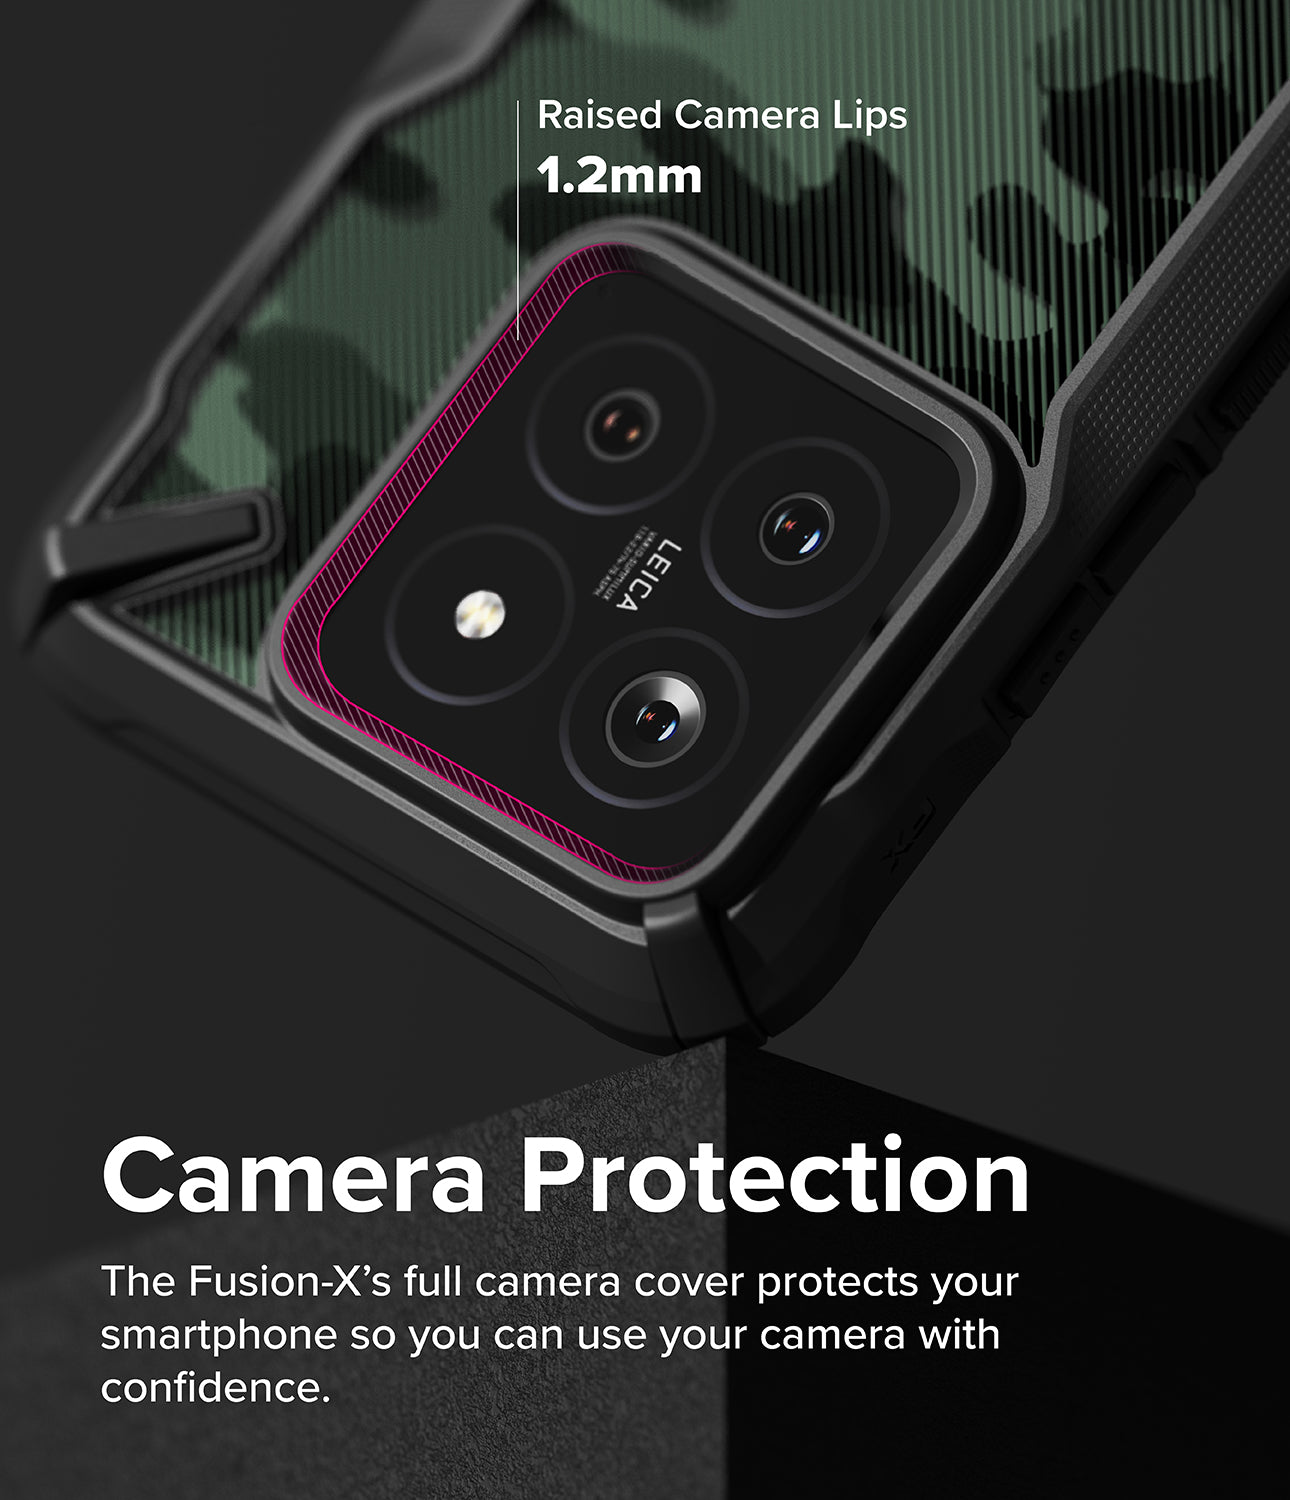 Xiaomi 14 Case | Fusion-X - Camo Black - Camera Protection. The Fusion-X's full camera cover protects your smartphone so you can use your camera with confidence.